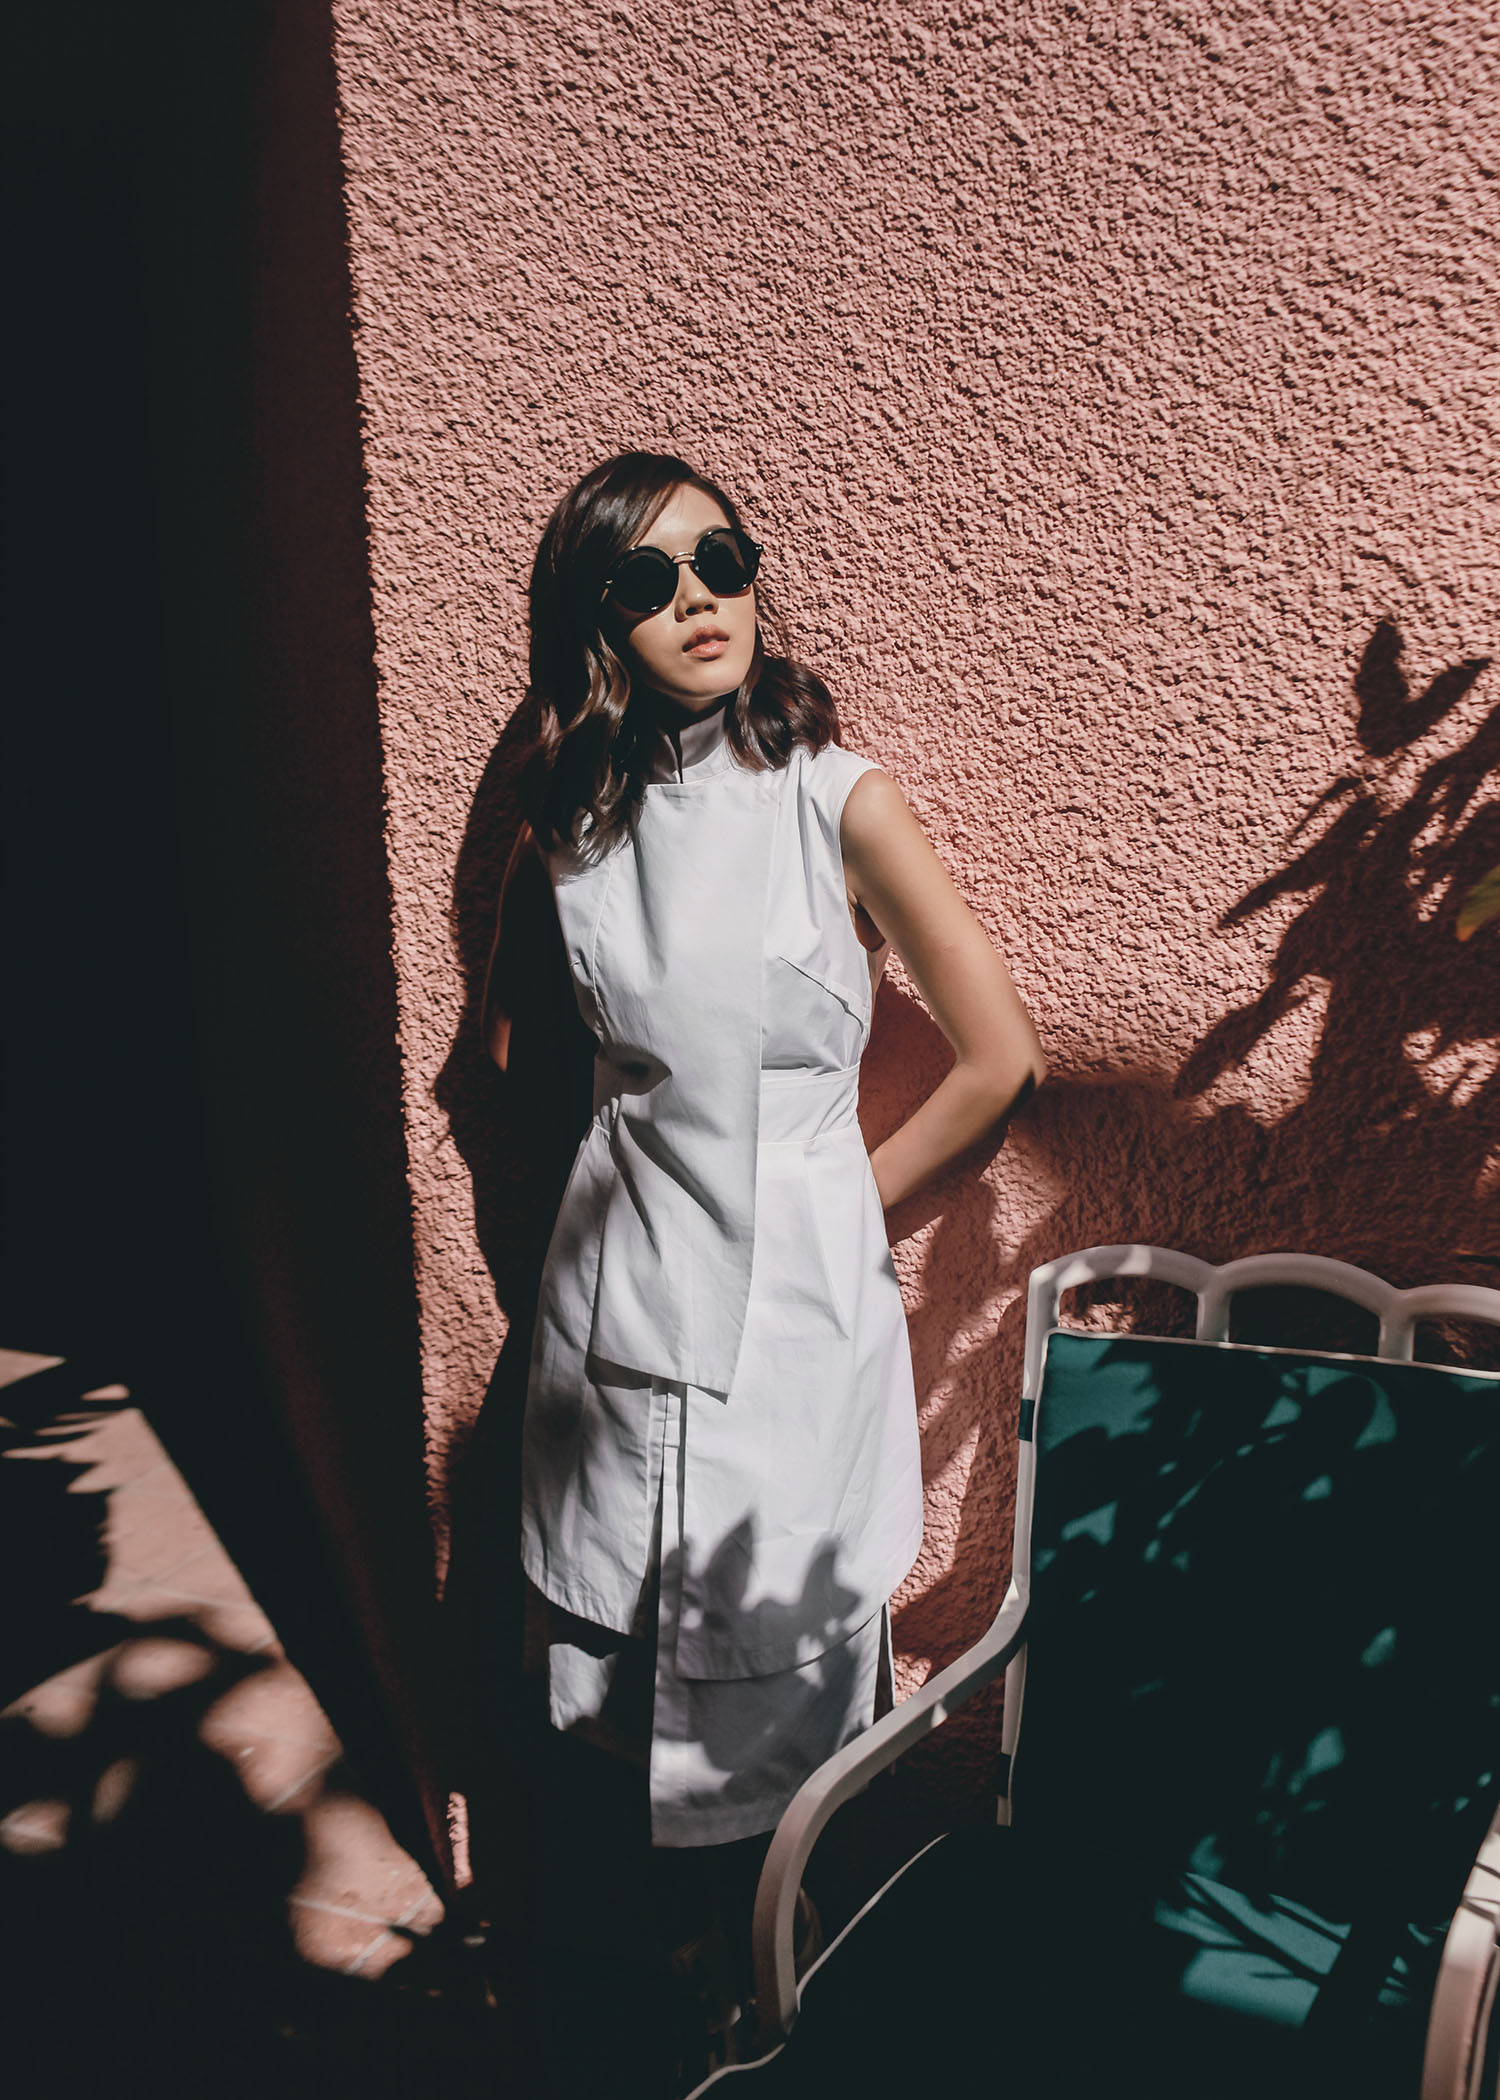 Street style fashion blogger influencer Jenny Tsang of Tsangtastic wearing ACLER Shirt Dress, GUCCI Round Sunglasses, ELLERY zipped platform ankle boots, in Beverly Hills Hotel, Los Angeles, California.